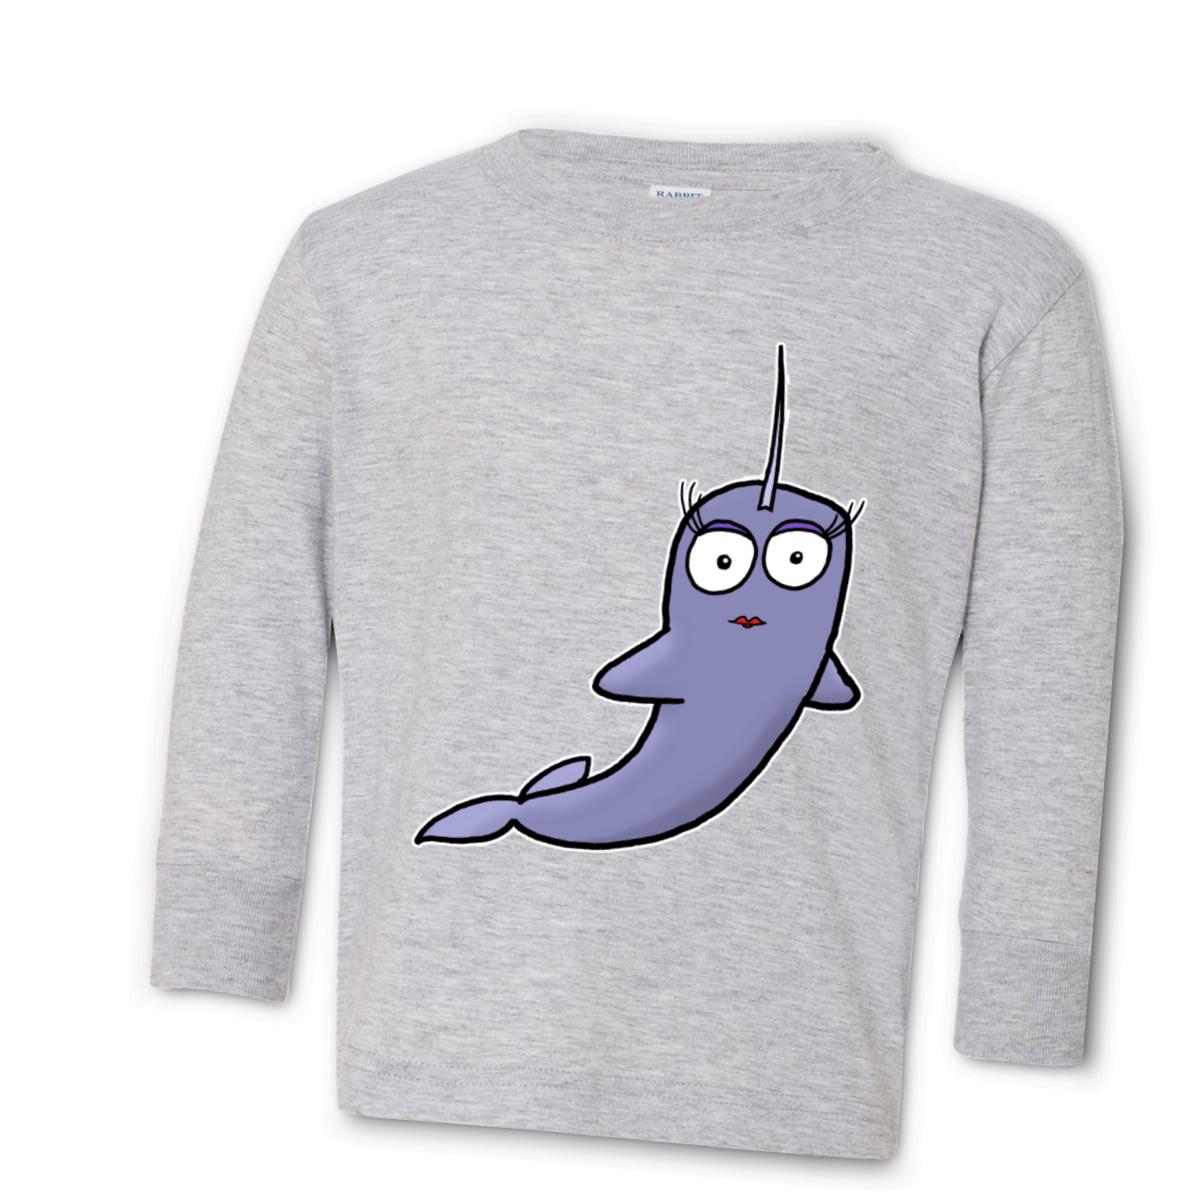 Narwhal Toddler Long Sleeve Tee 4T heather